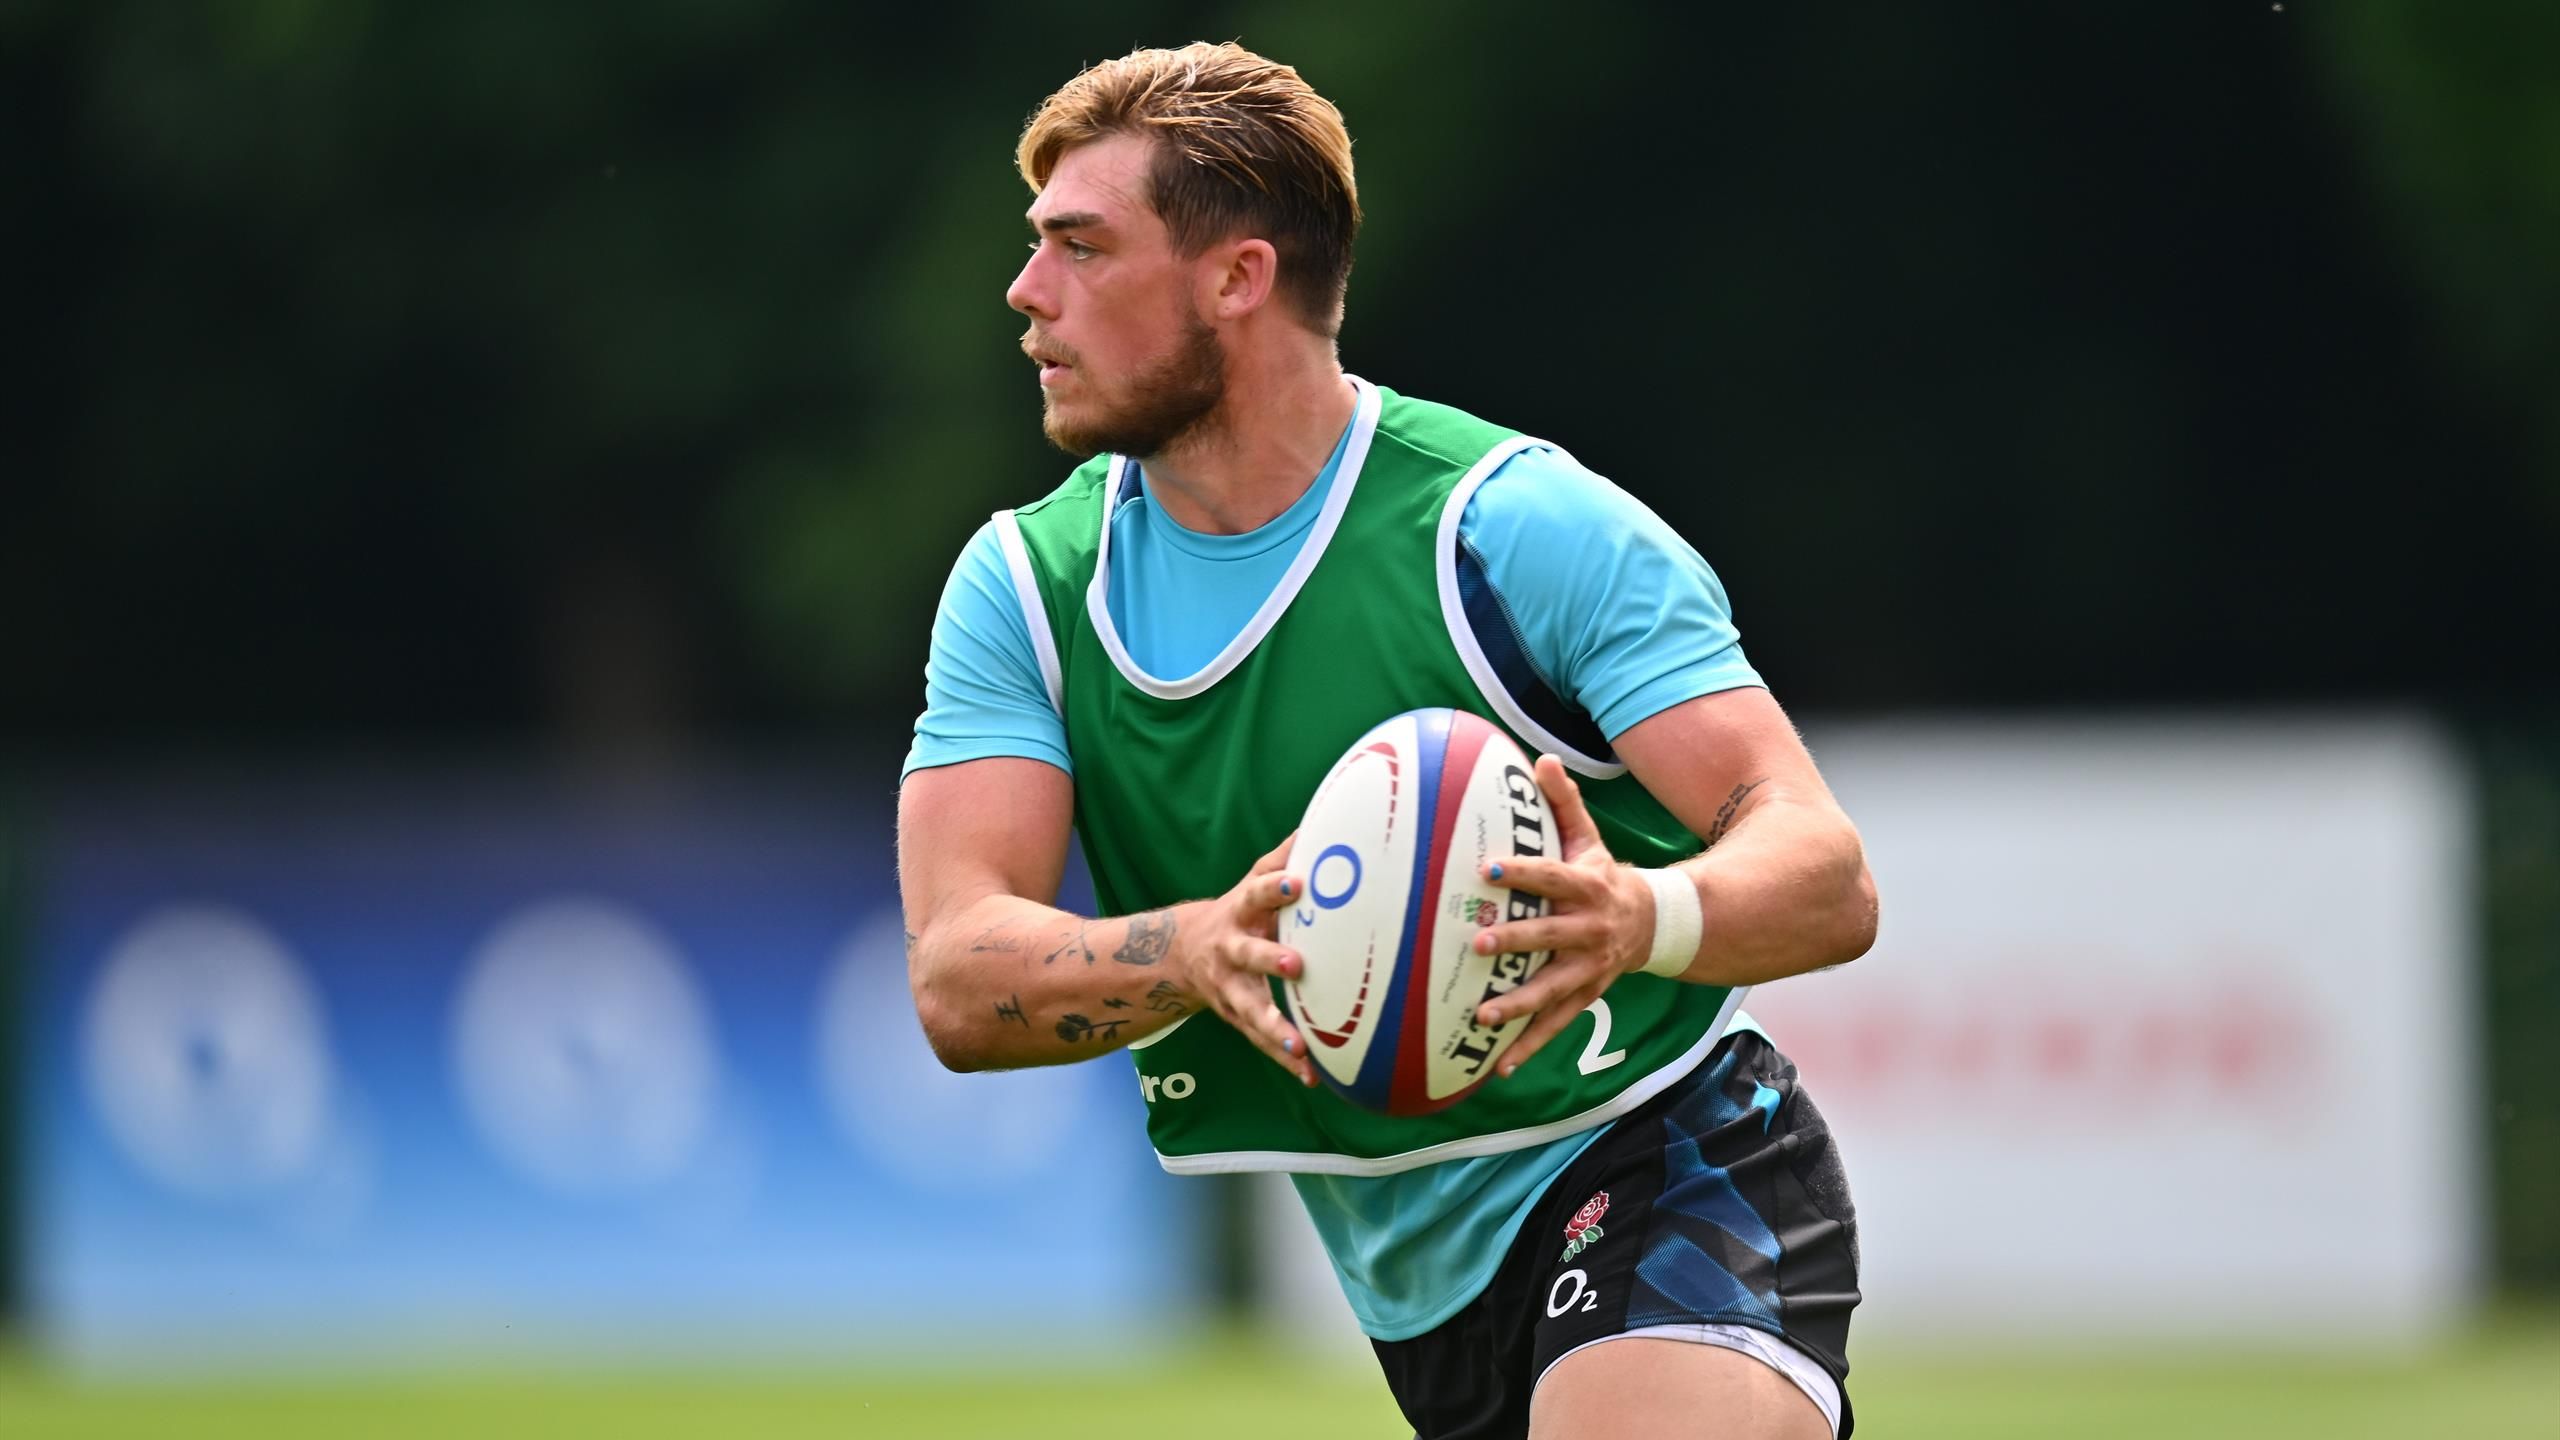 Rugby World Cup Ollie Hassell-Collins dropped from England training squad, Ben Youngs and Jack van Poortvliet come in